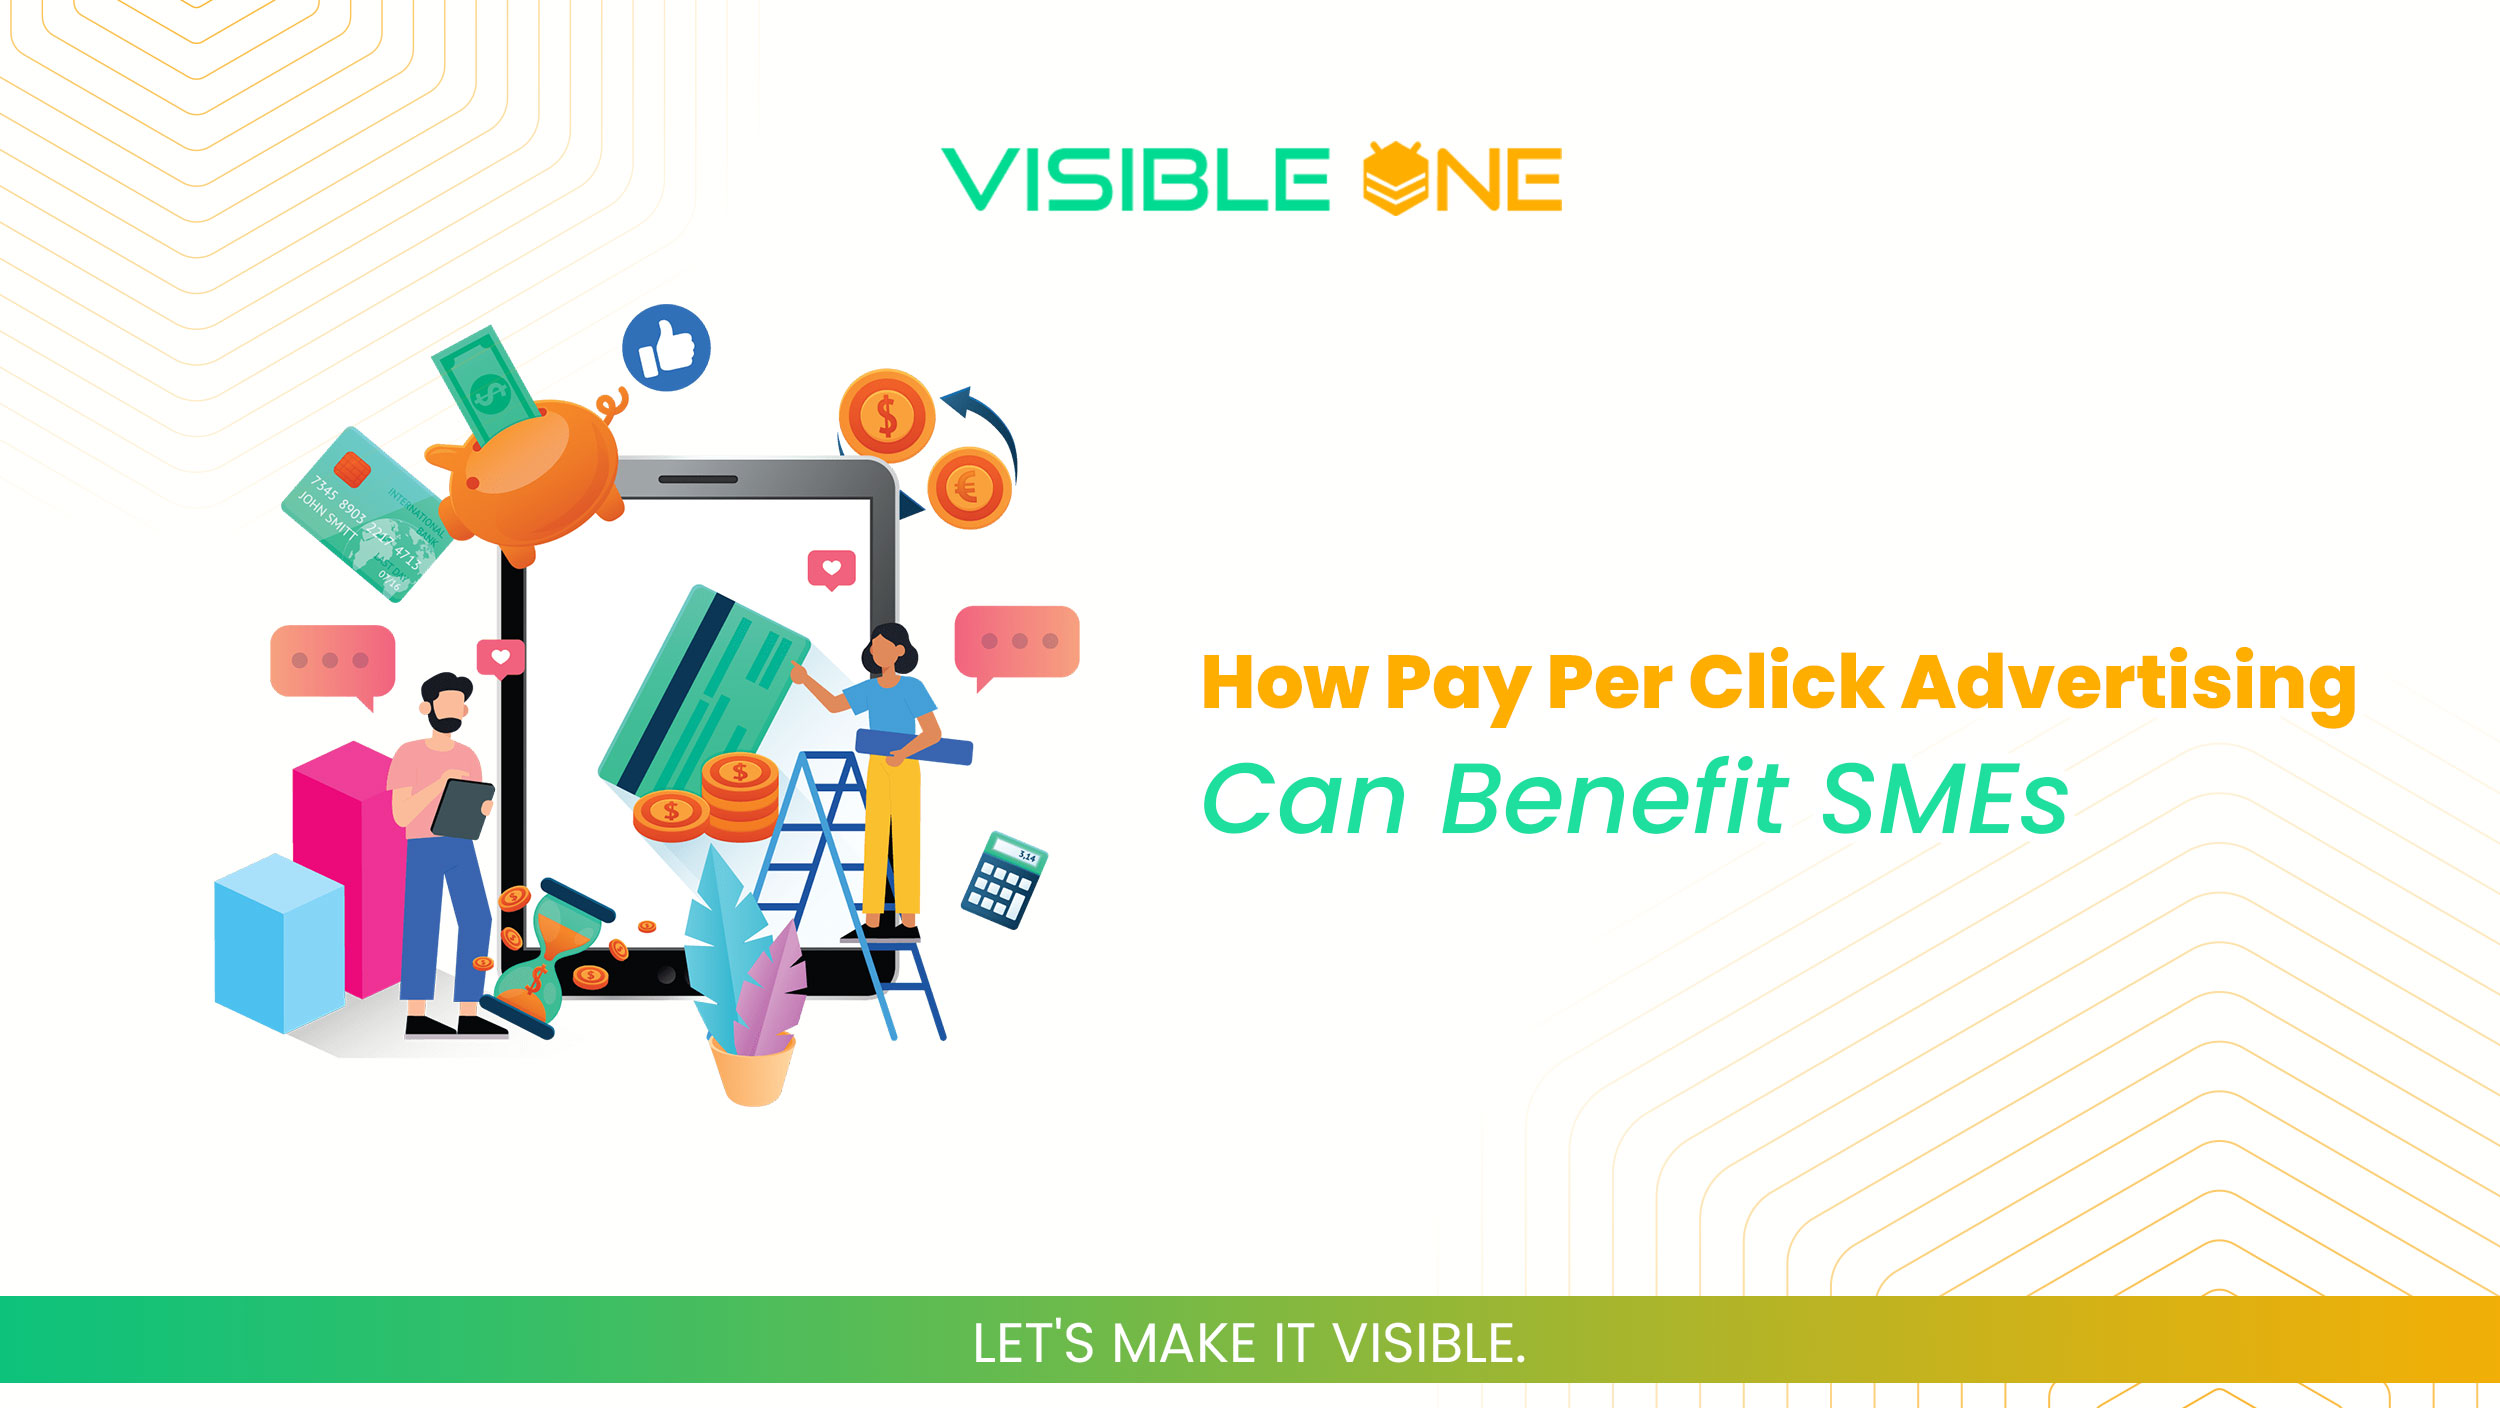 How Pay Per Click Advertising Can Benefit SMEs